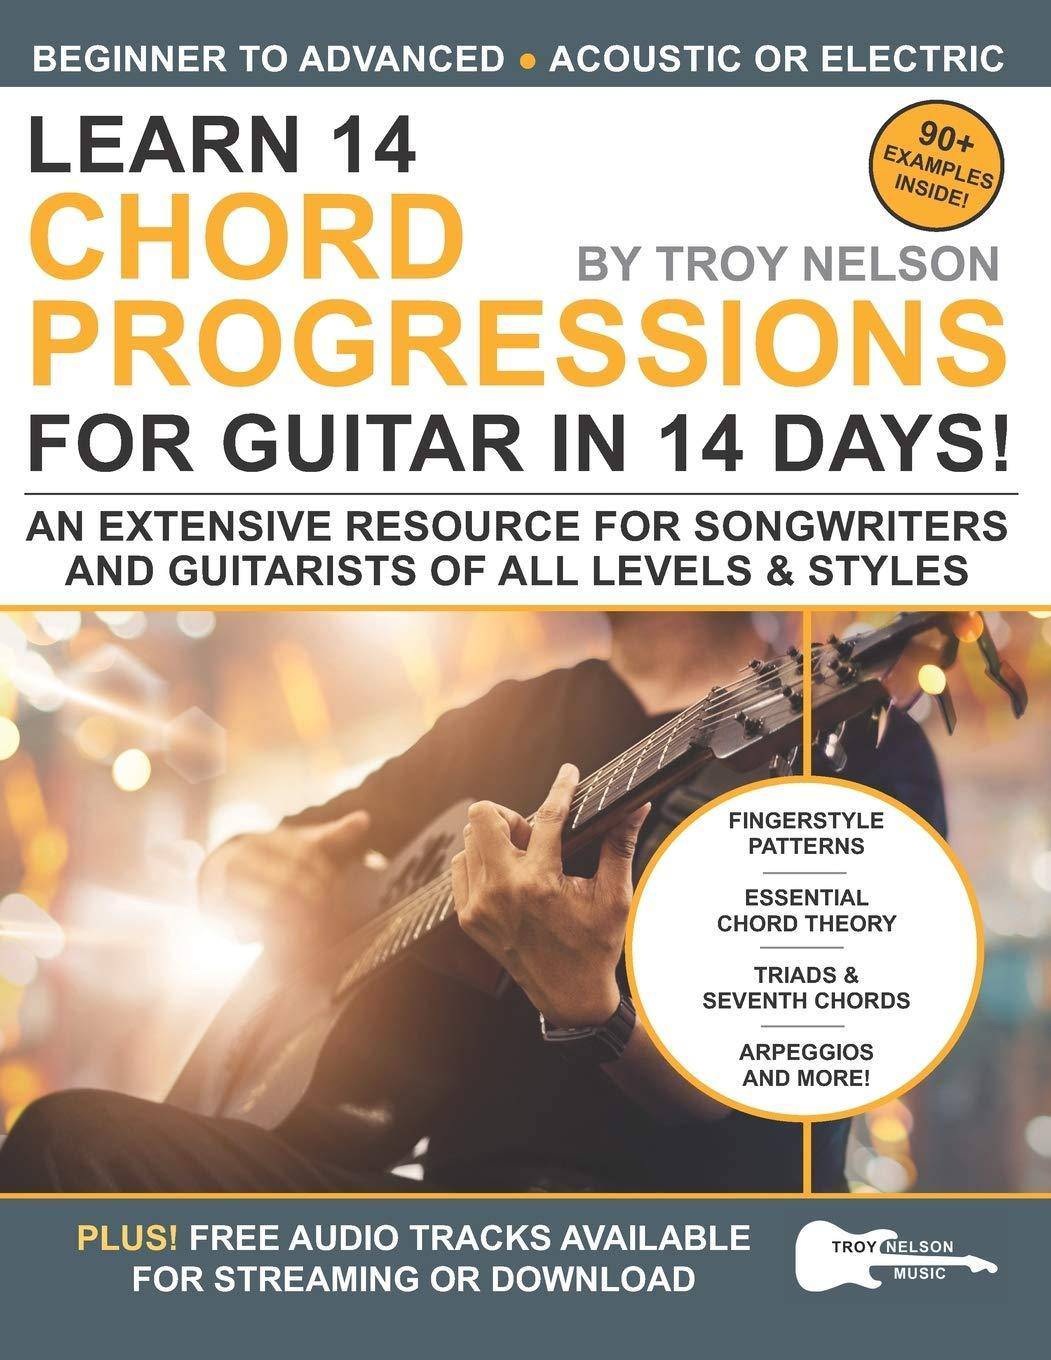 Learn 14 Chord Progressions for Guitar in 14 Days - SureShot Books Publishing LLC